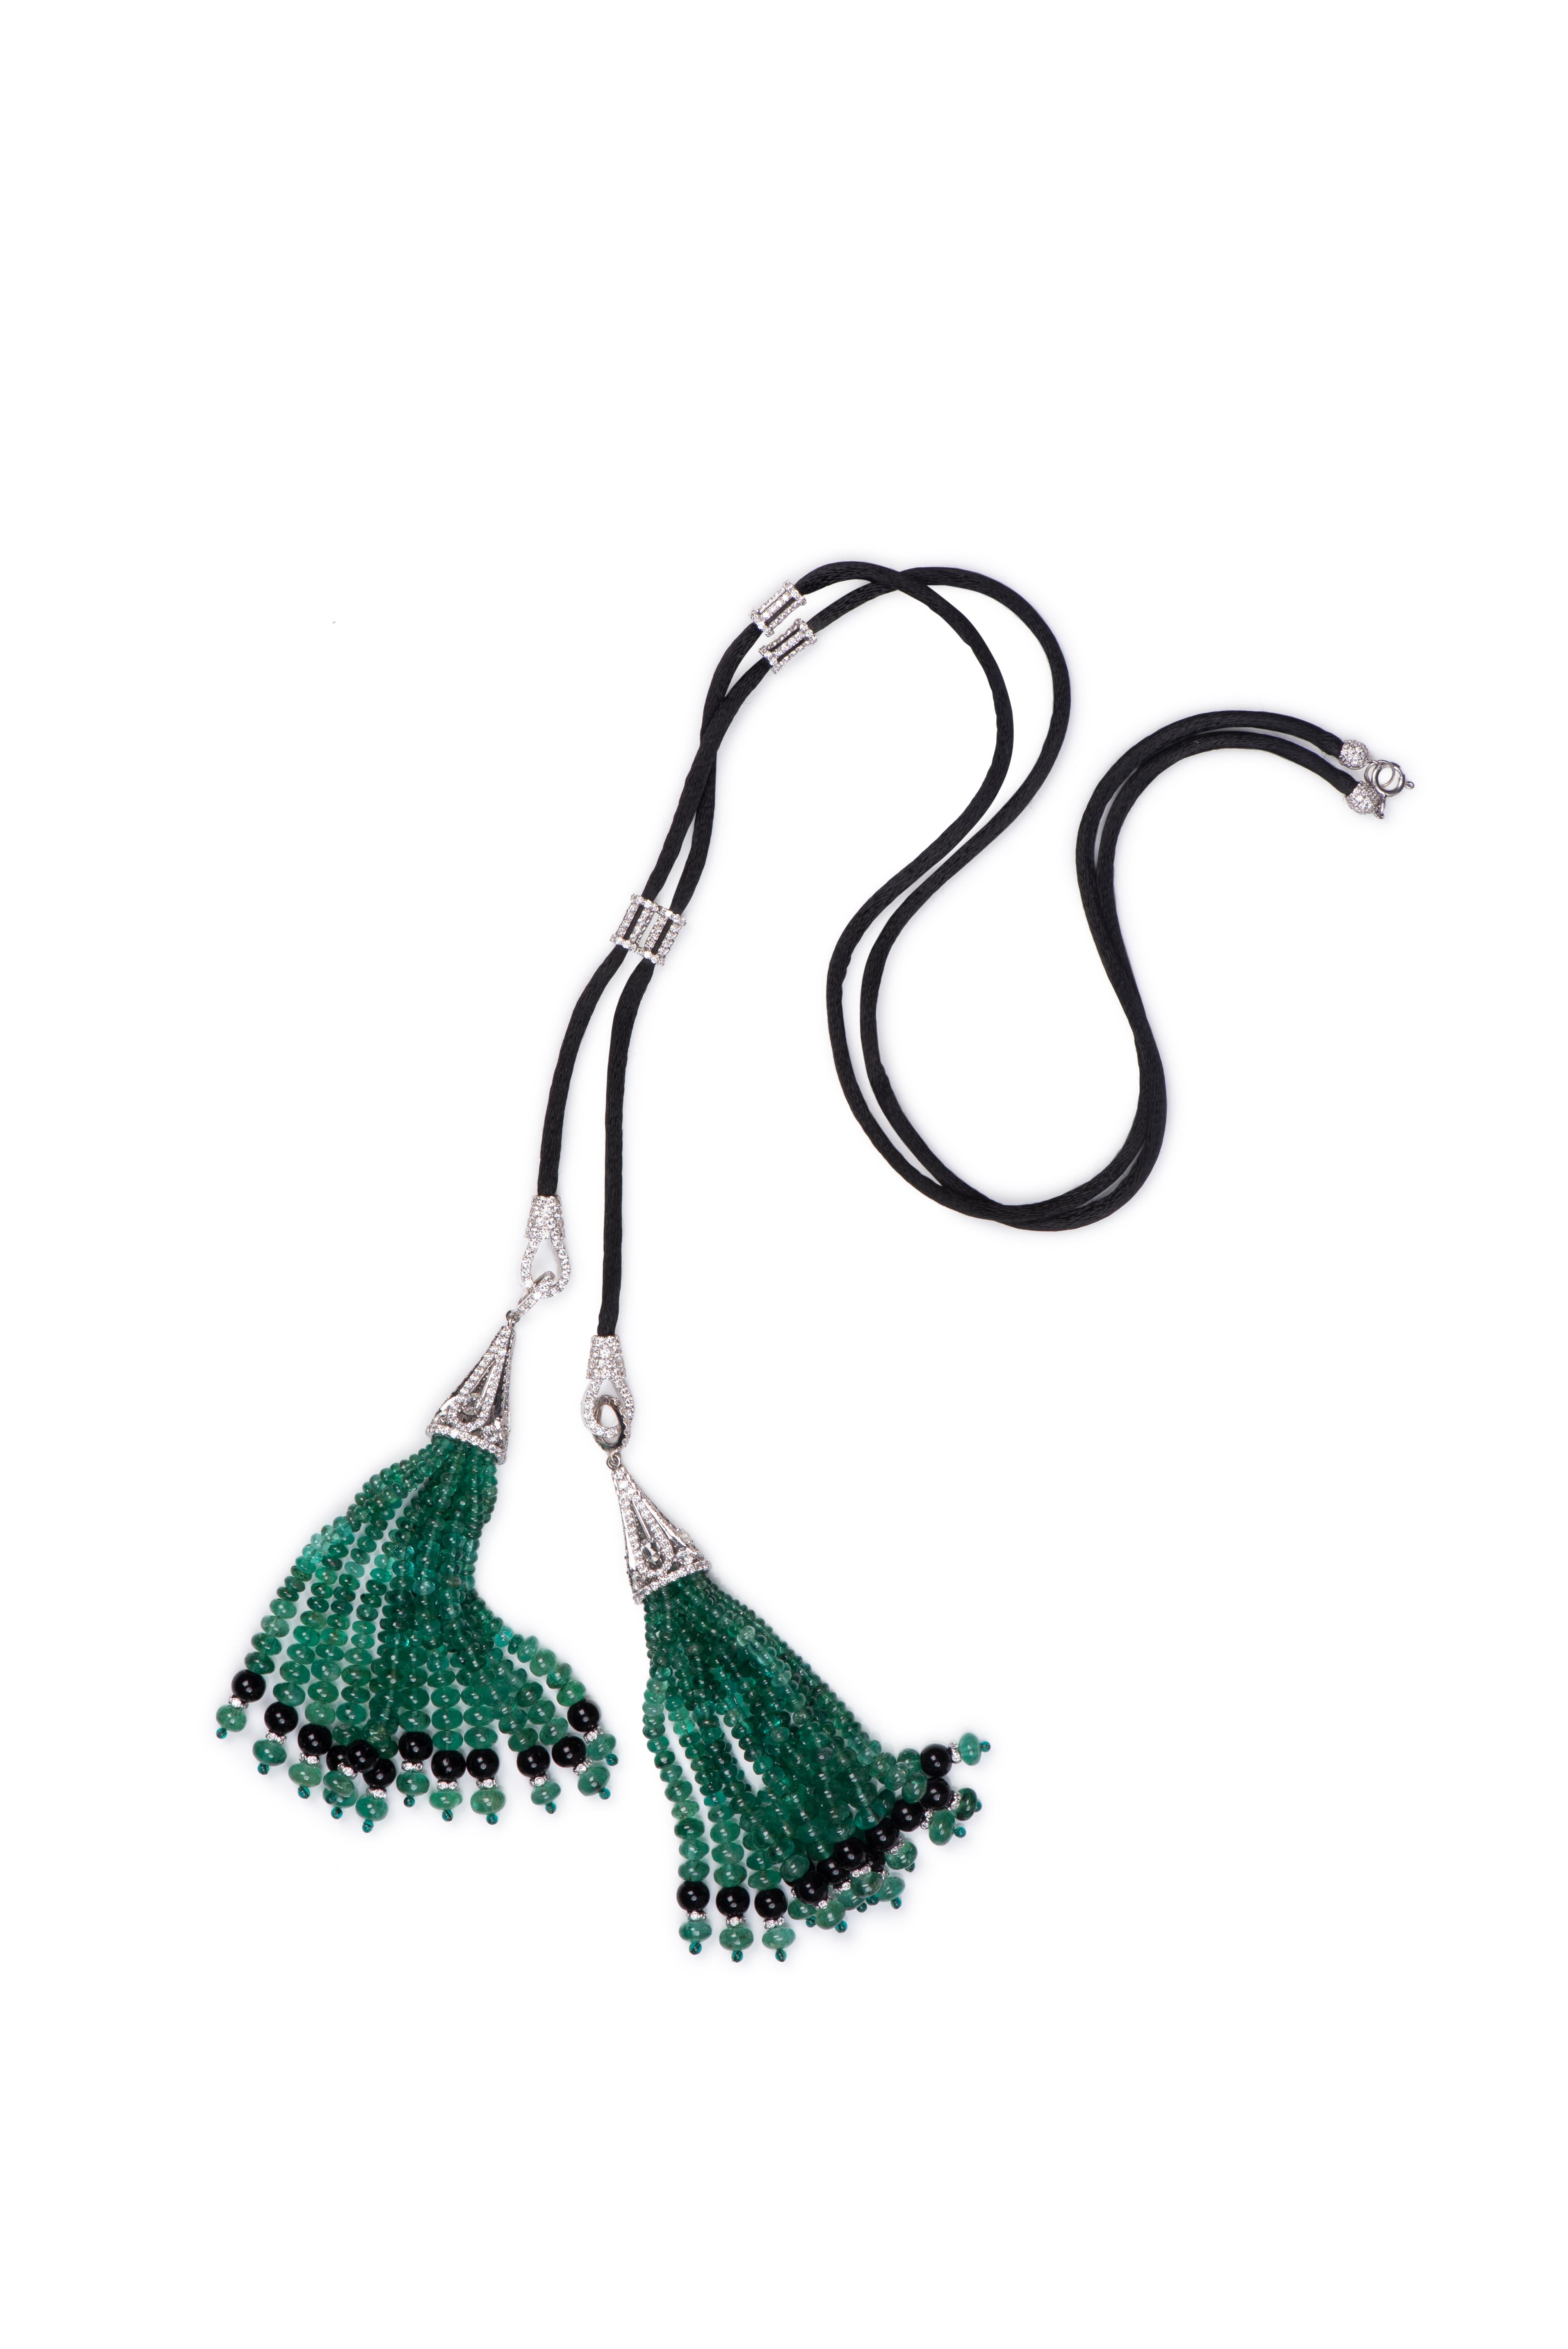 Round Cut Diamond Emerald Double Tassel Black Chord Necklace For Sale